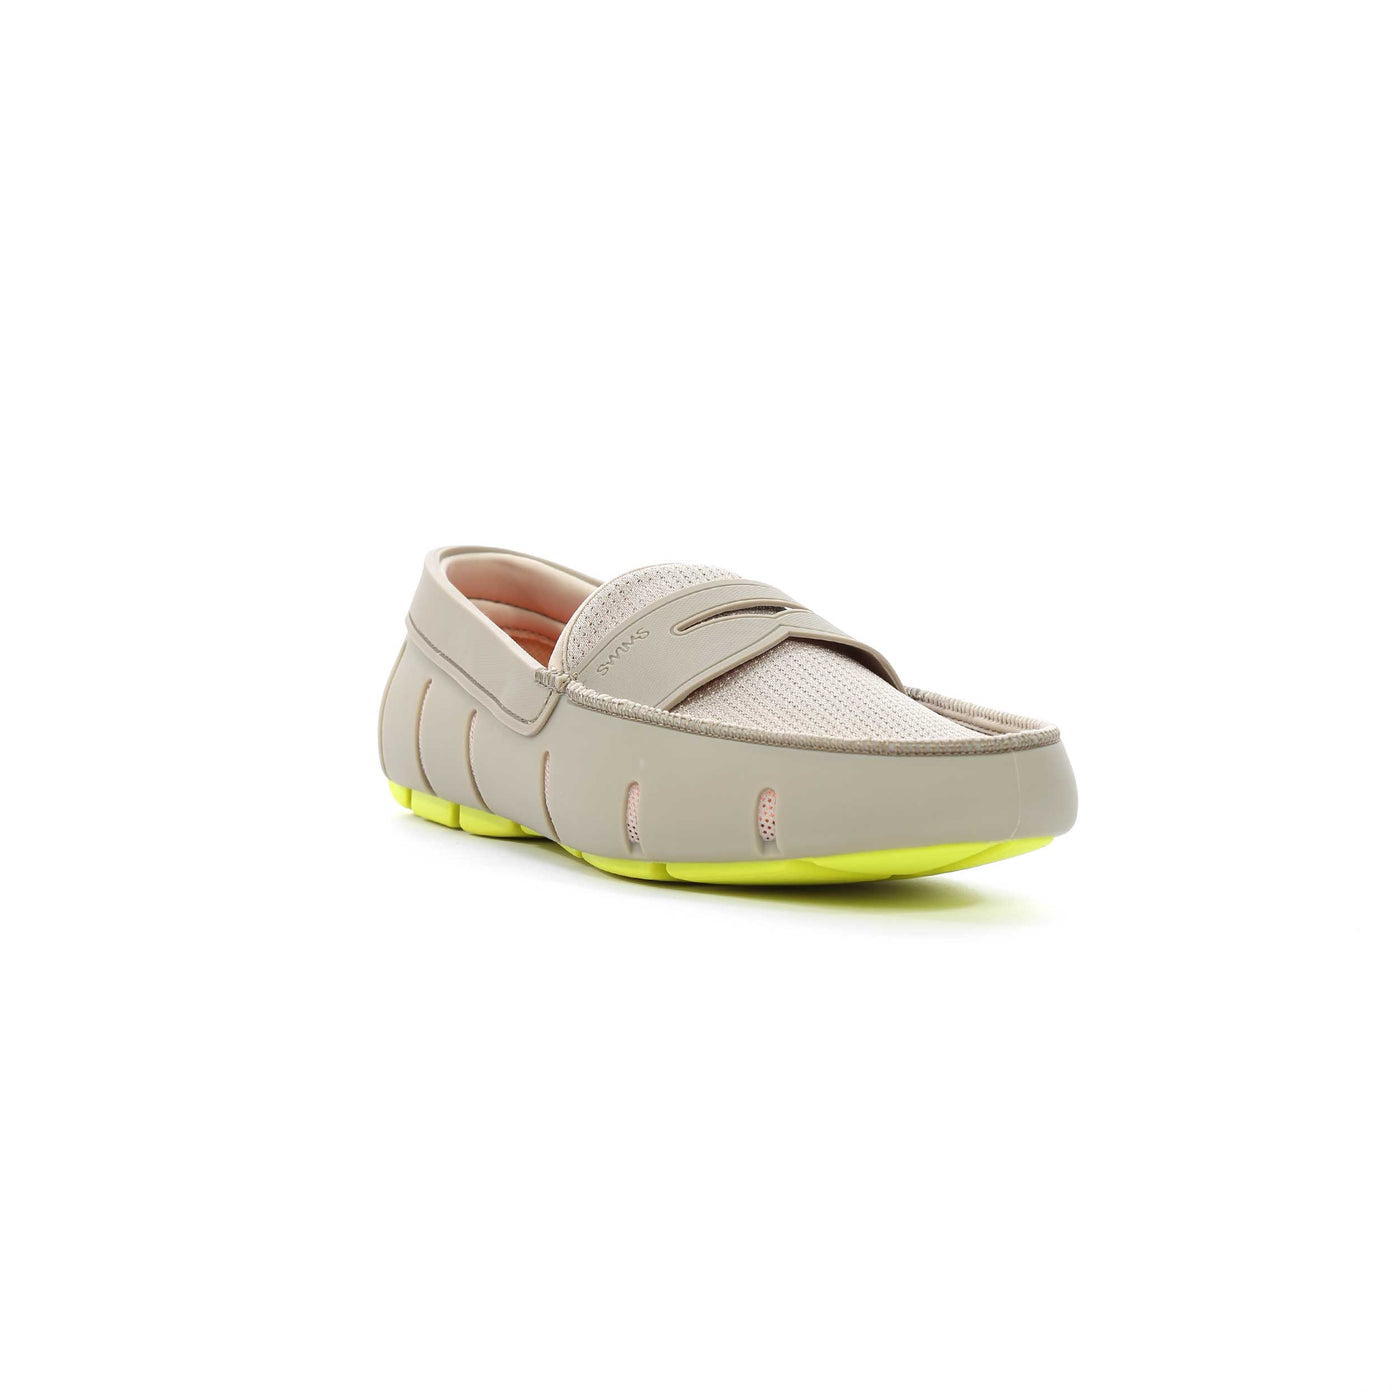 Swims Penny Loafer Shoe in Sand Dune Toe